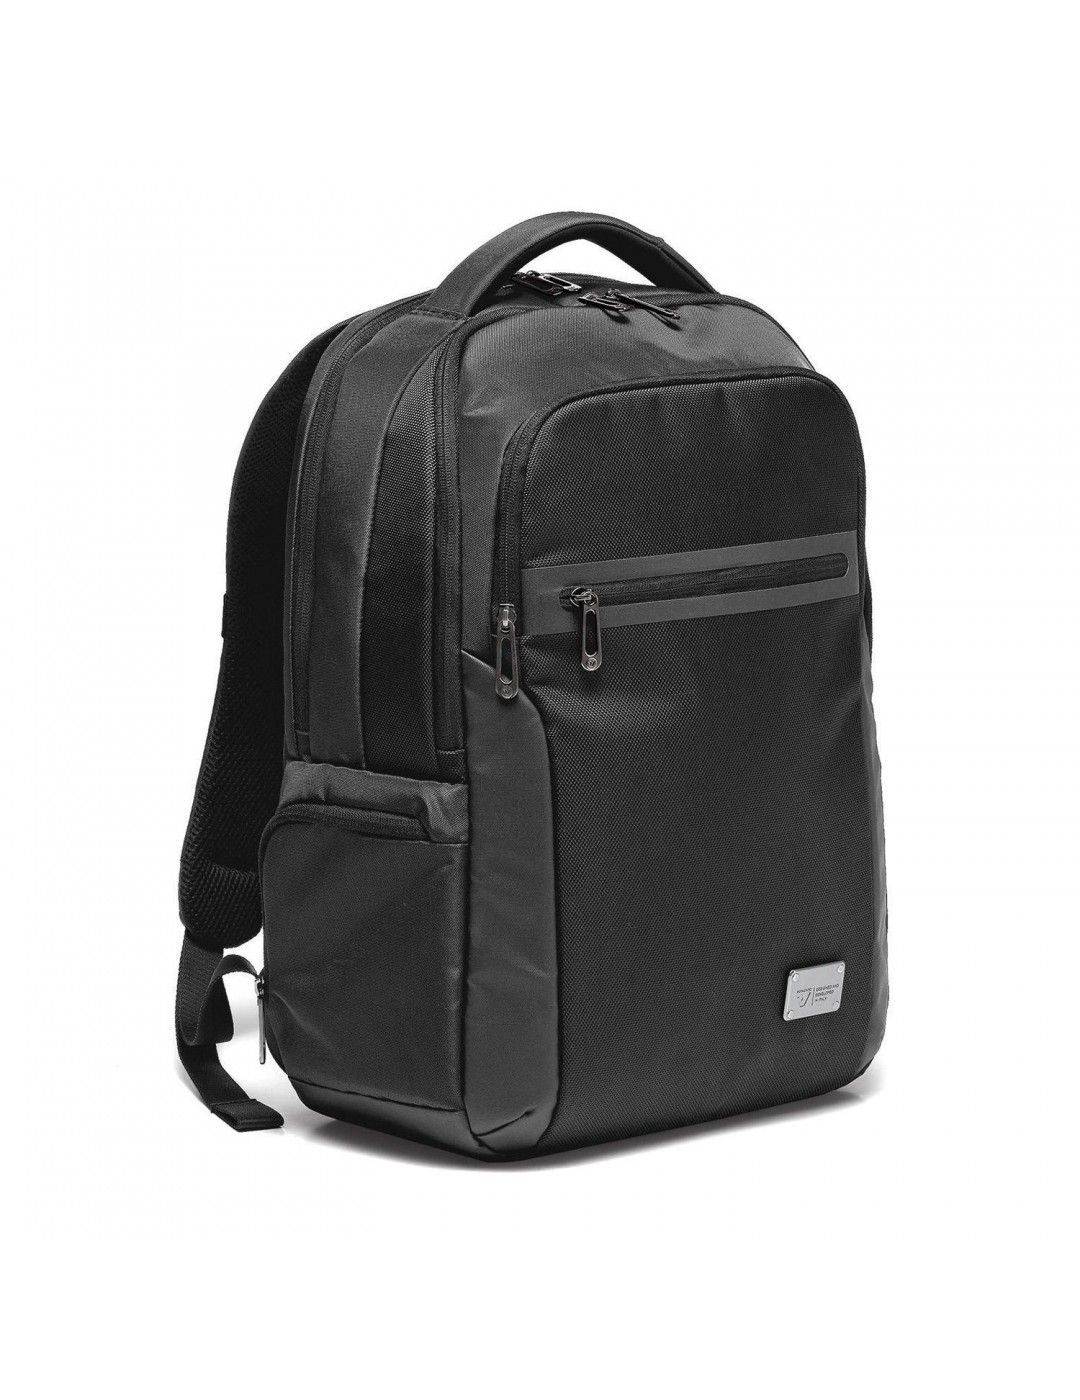 Roncato laptop backpack Desk 1 15.6 inches